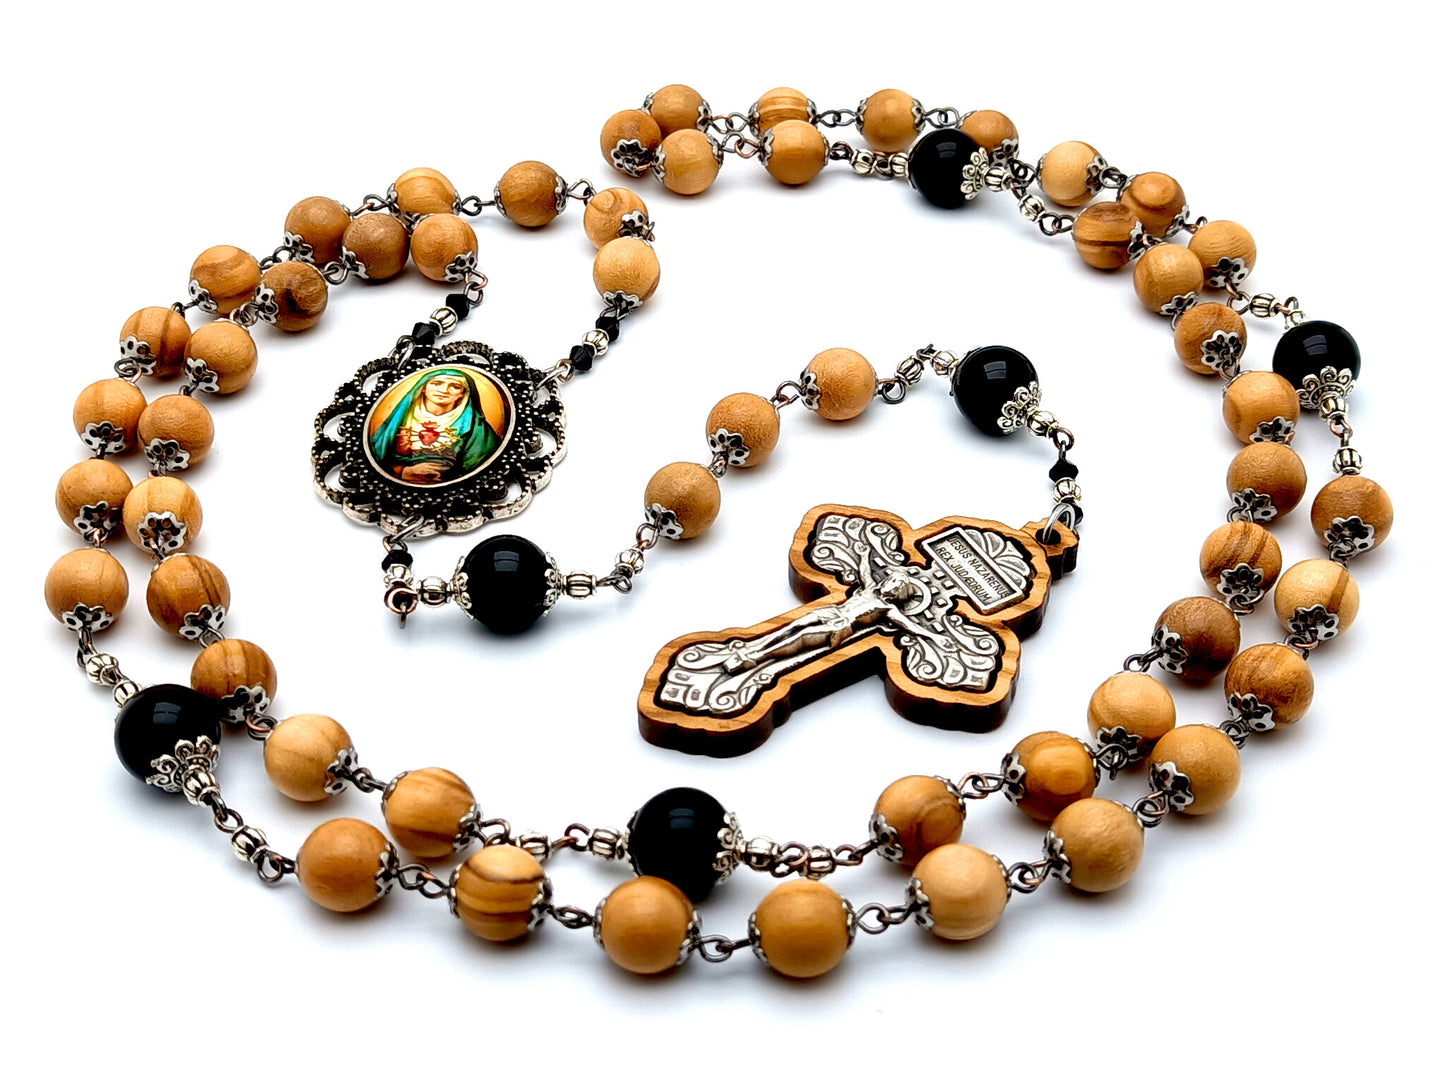 Our Lady of Sorrows unique rosary beads with olive wood and onyx gemstone beads and olive wood framed pardon crucifix.